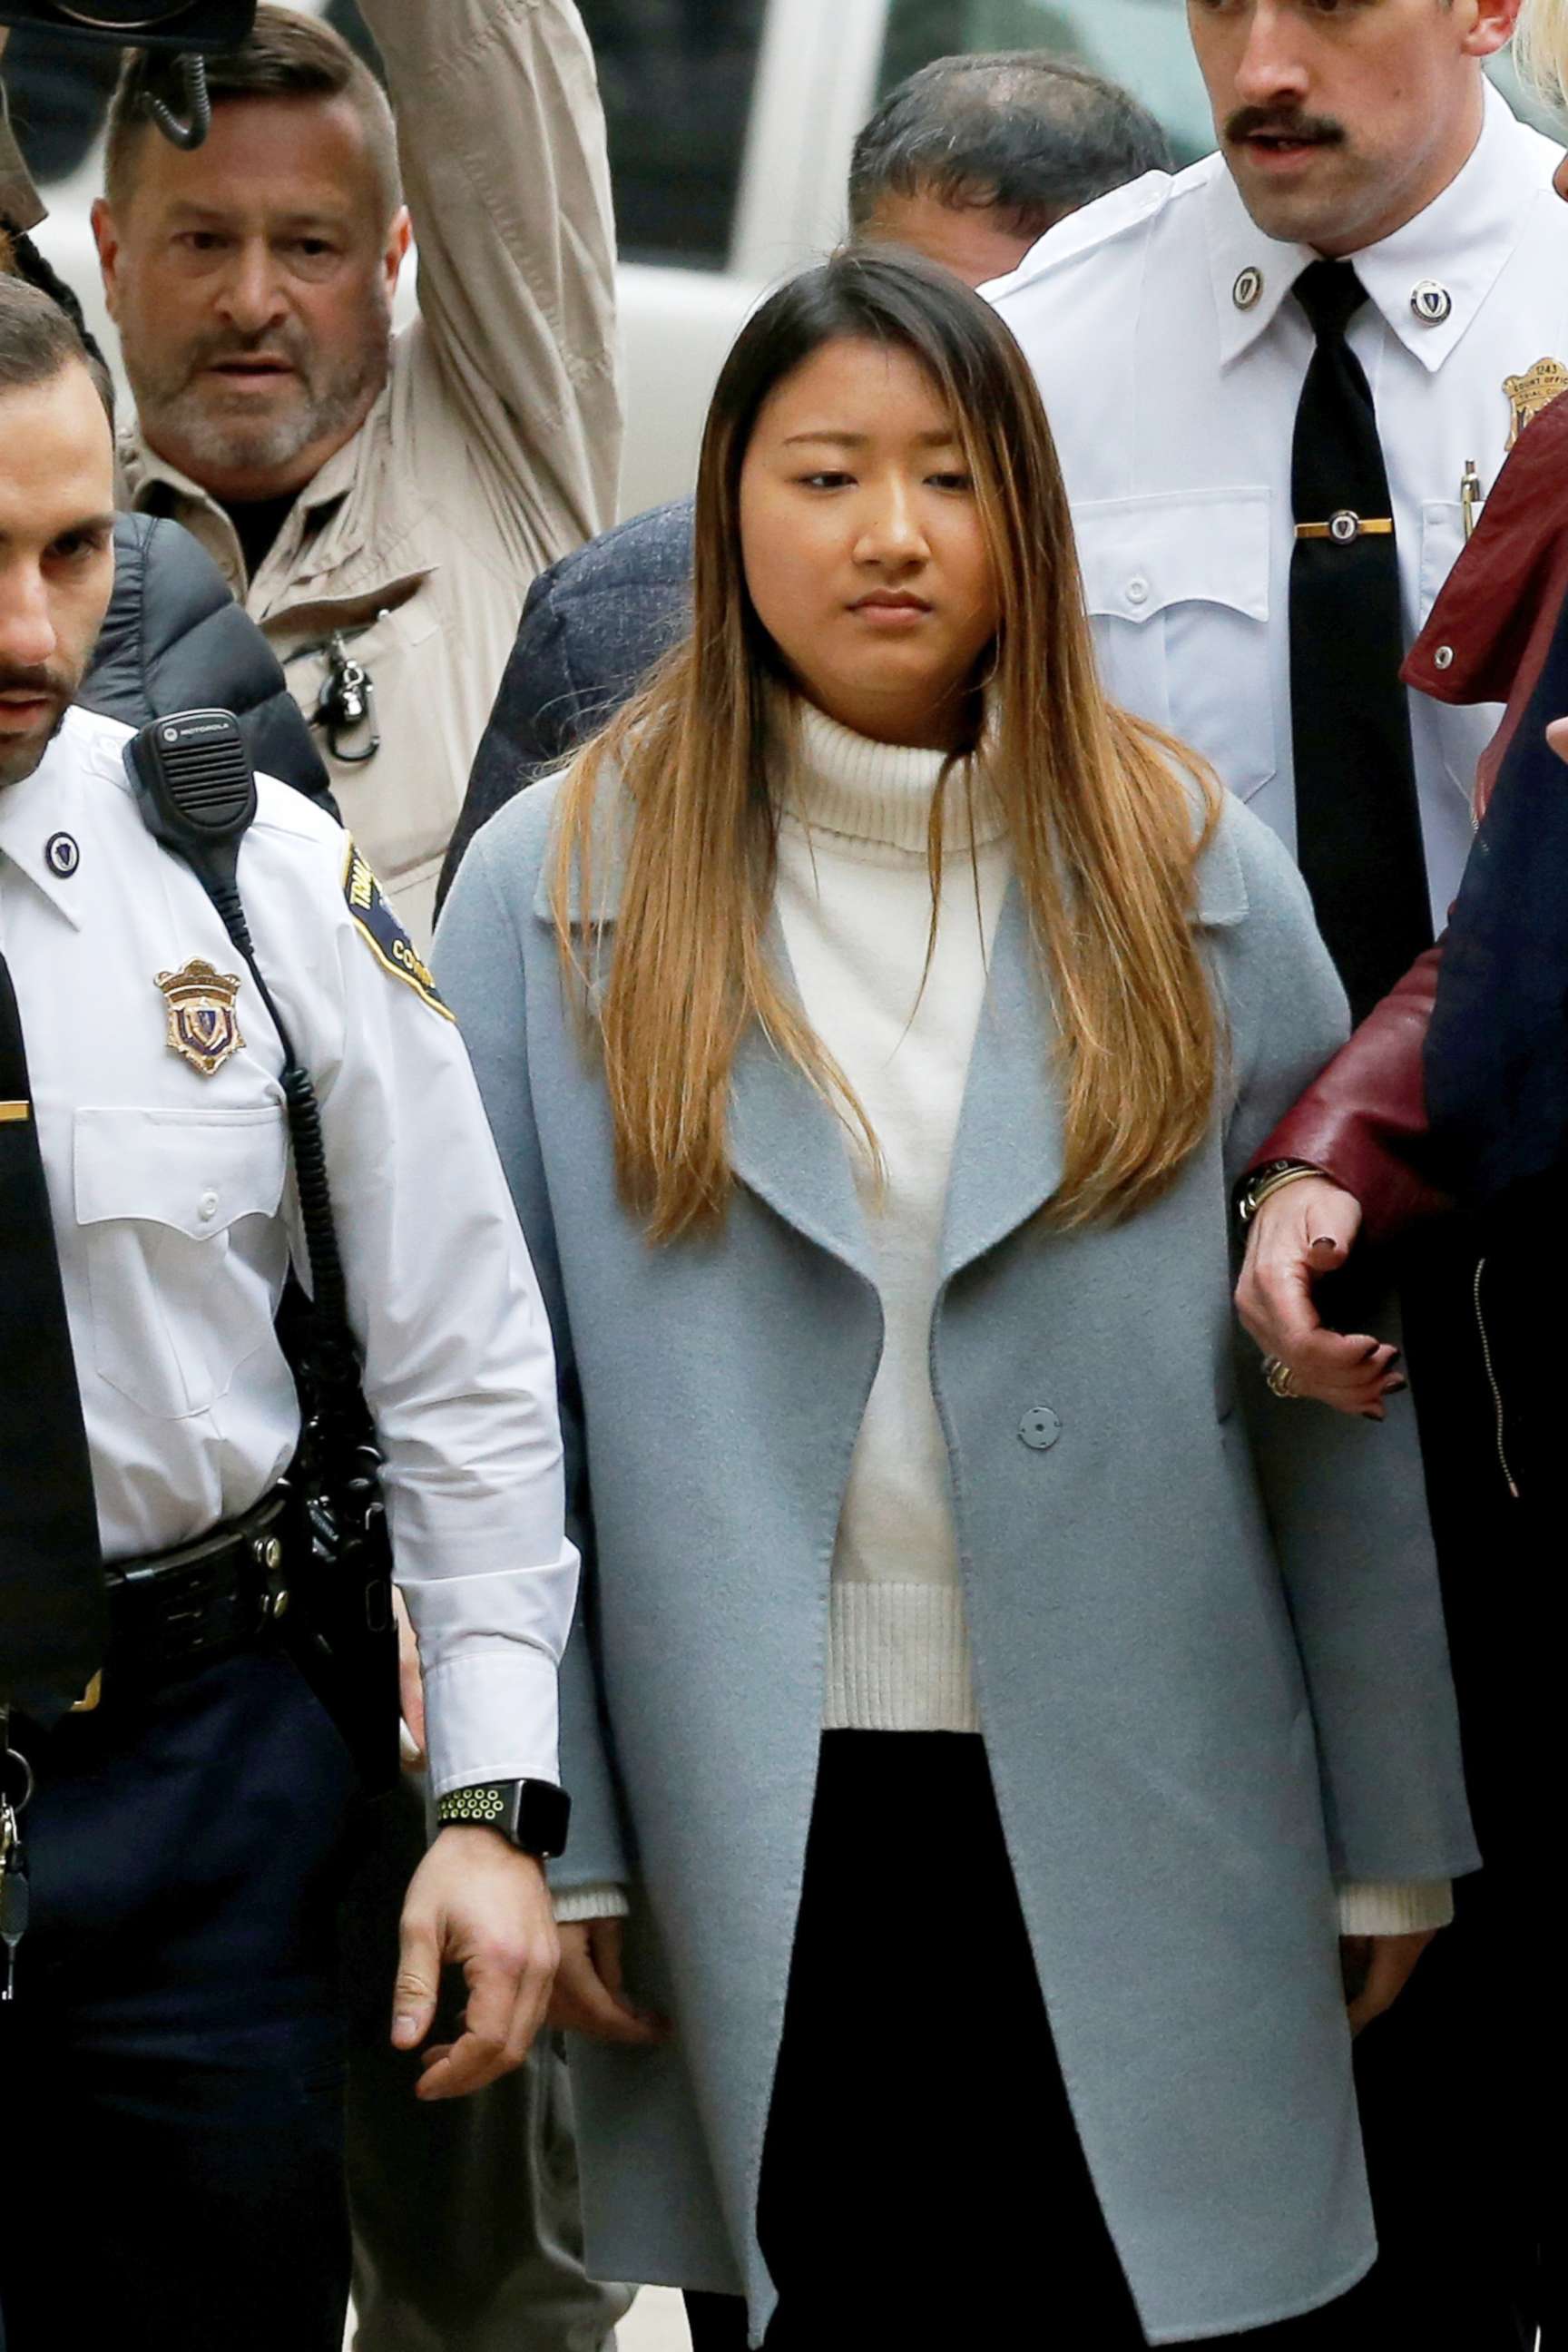 PHOTO: Inyoung You, a former Boston College student from South Korea, arrives in court to be arraigned on involuntary manslaughter charges in connection with the suicide of her boyfriend in Boston, Nov. 22, 2019.